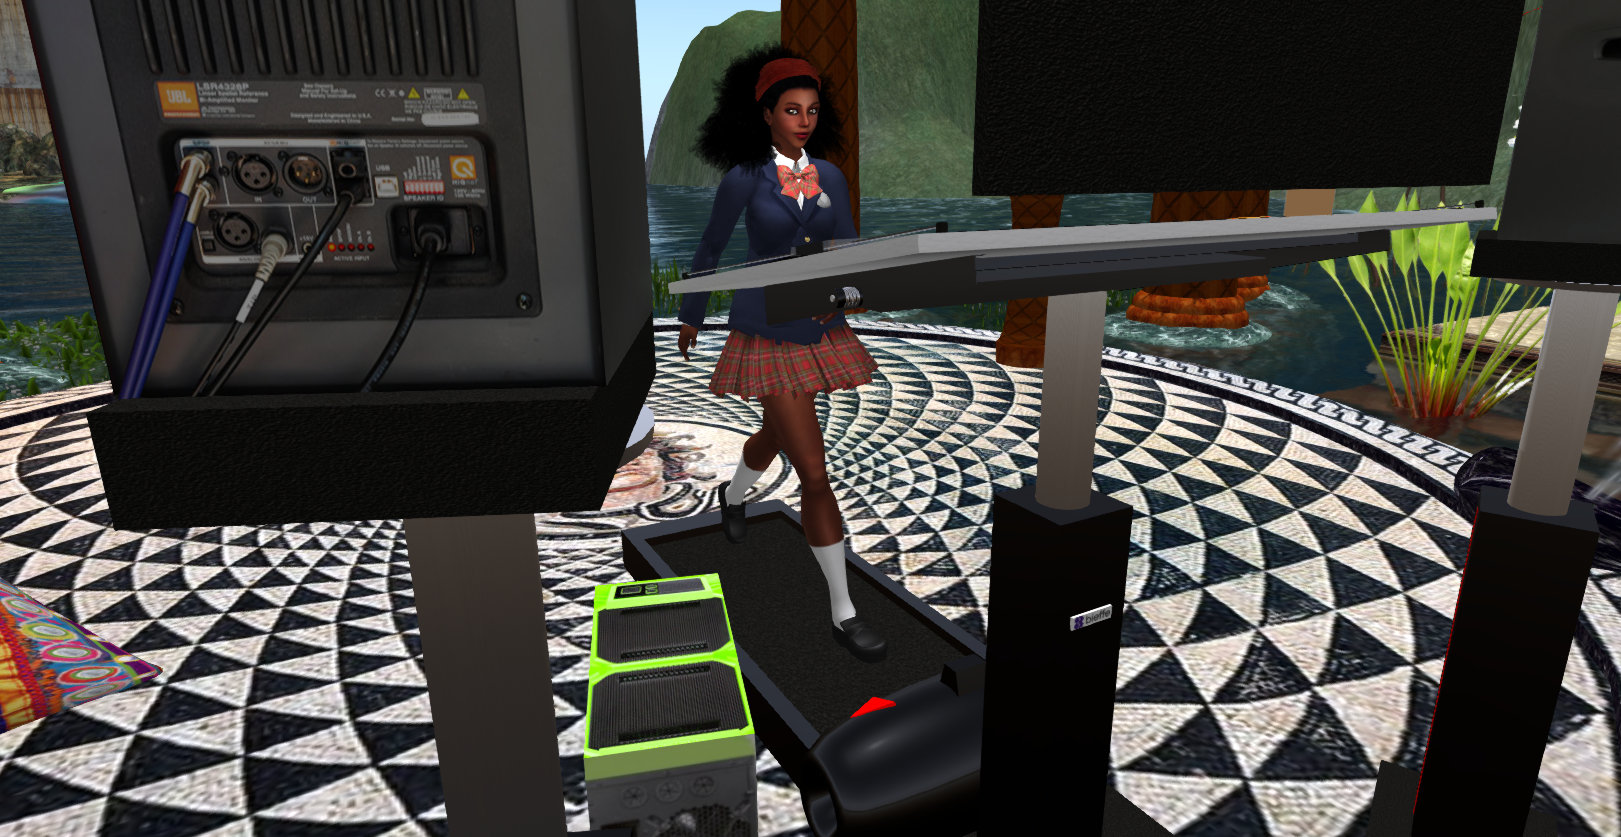 Student Diversity: ScreenCap of Vaneeesa Blaylock walking on her "treadmill desk" in the VB28 Roman Villa while watching Gamification lectures by Kevin Werbach